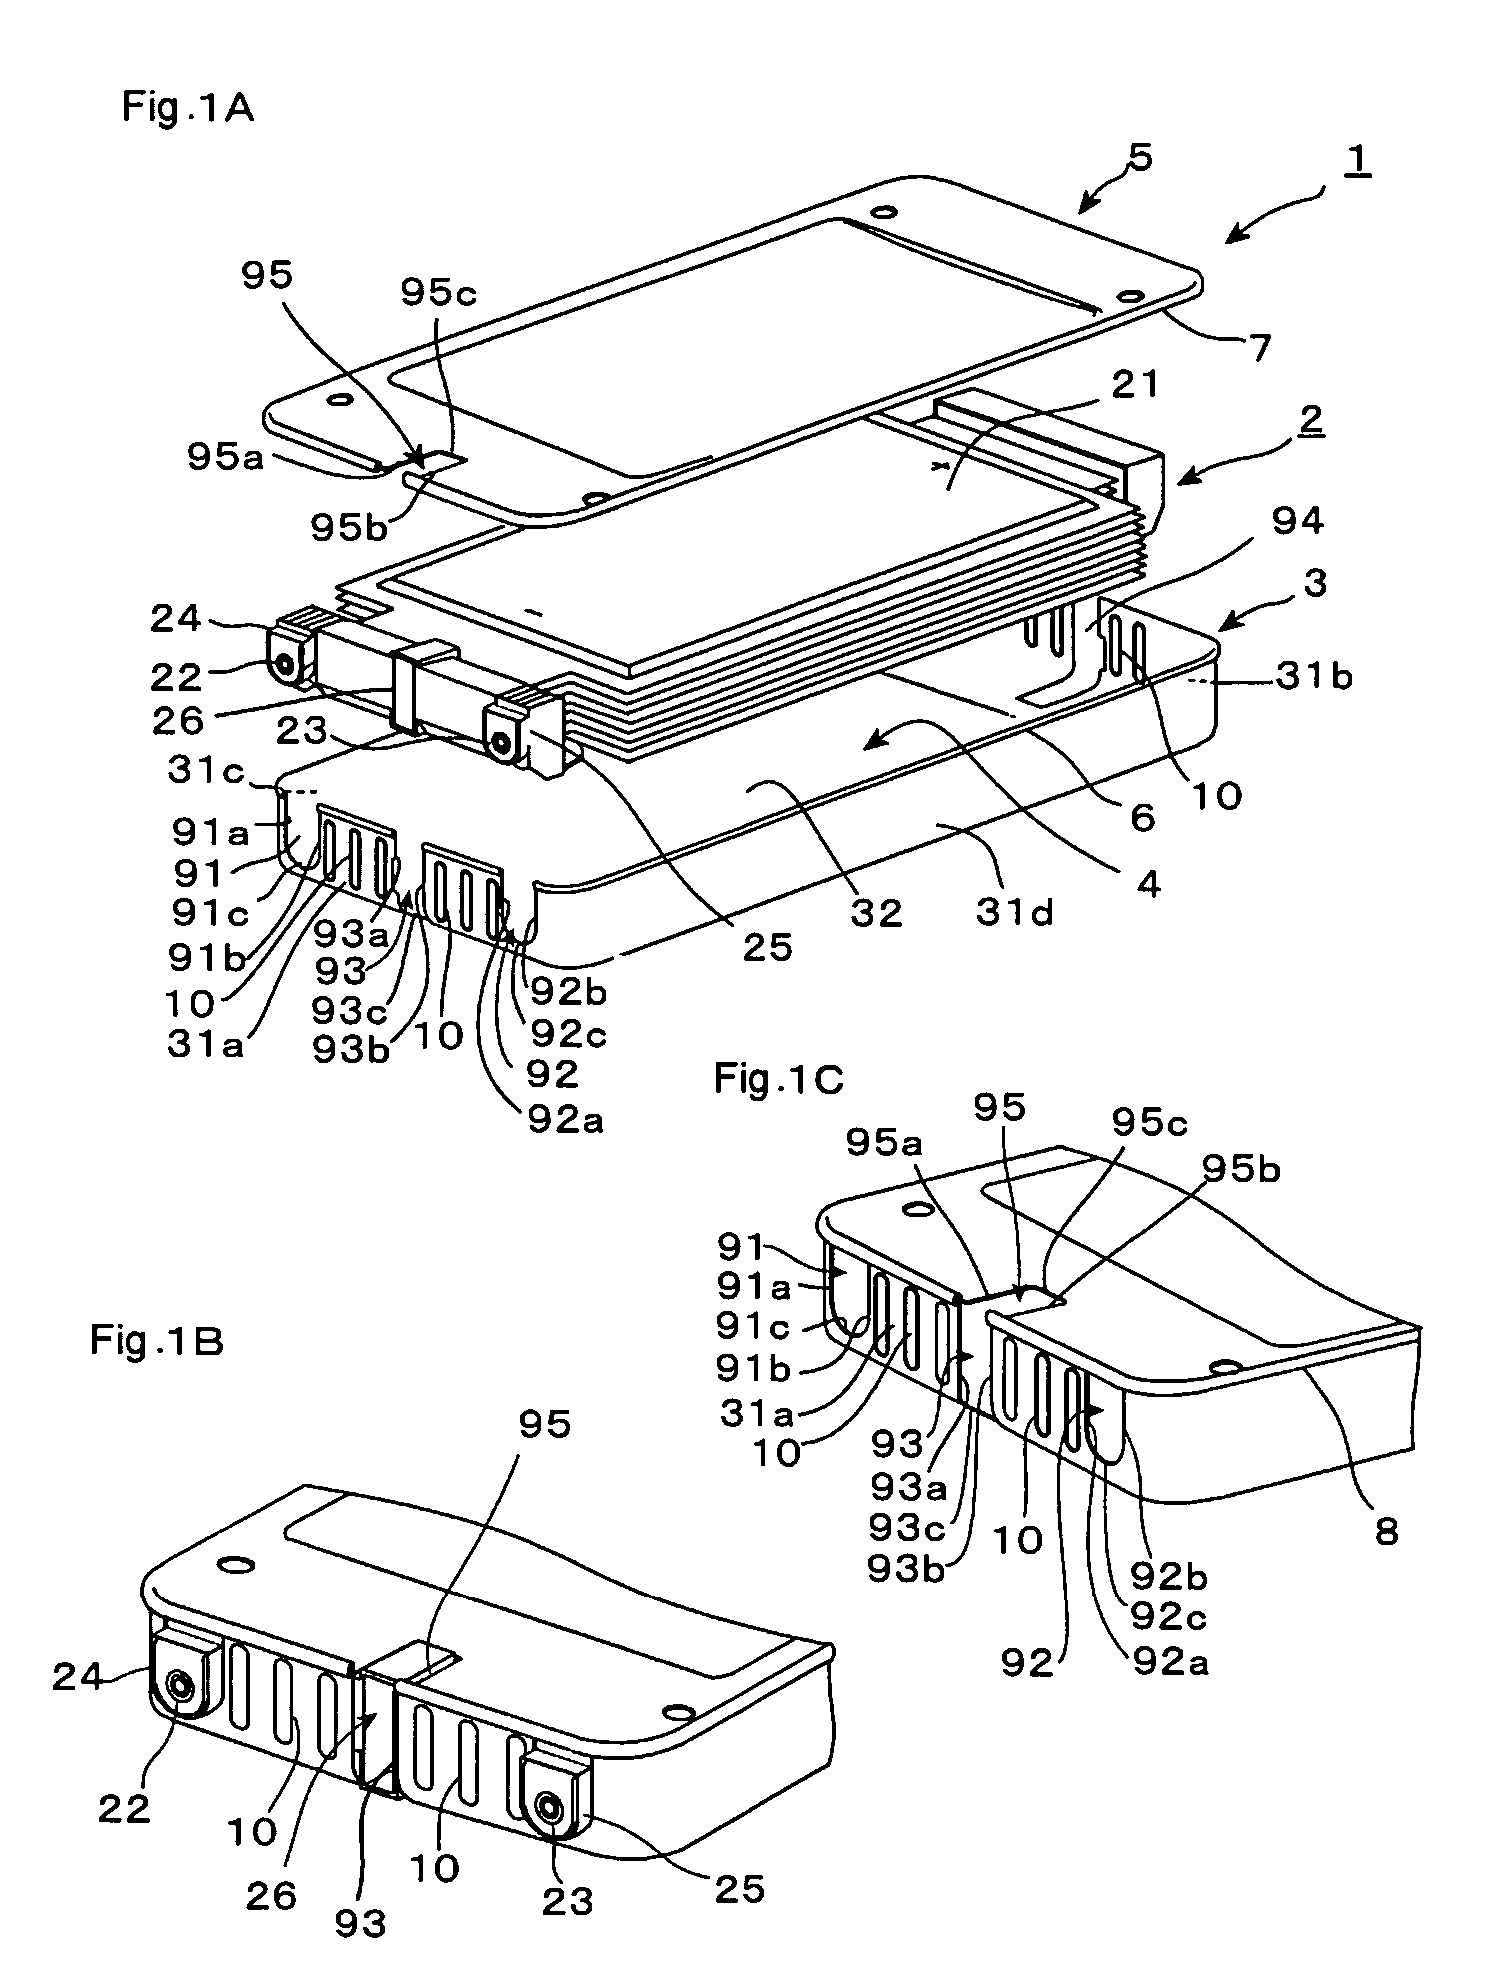 Battery outer case for receiving a flat battery pack joined by seam-rolling